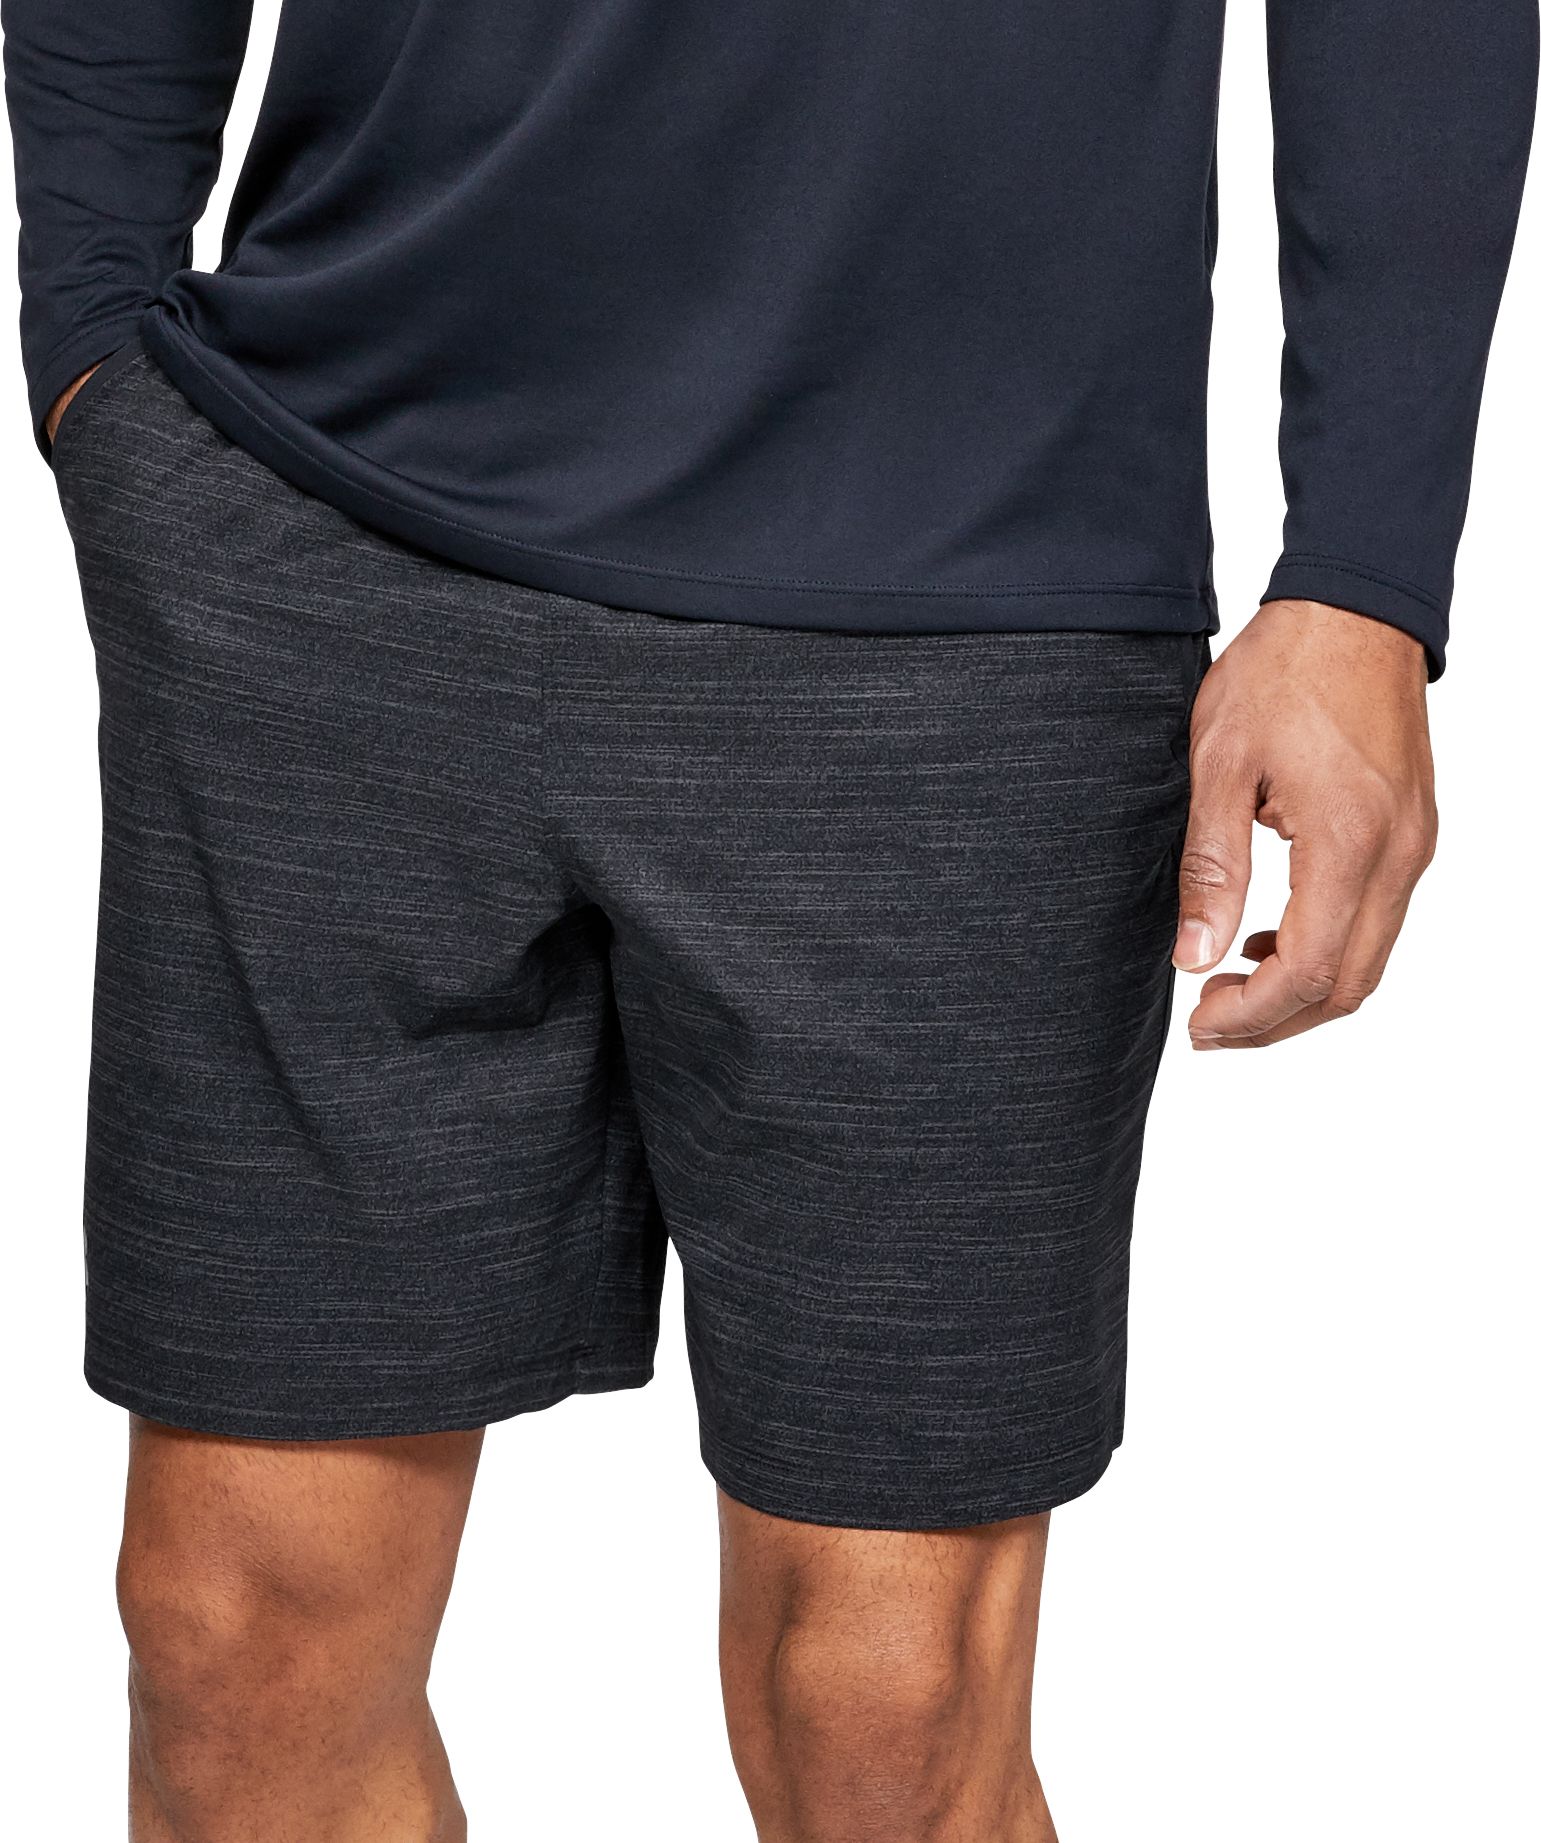 under armour printed shorts